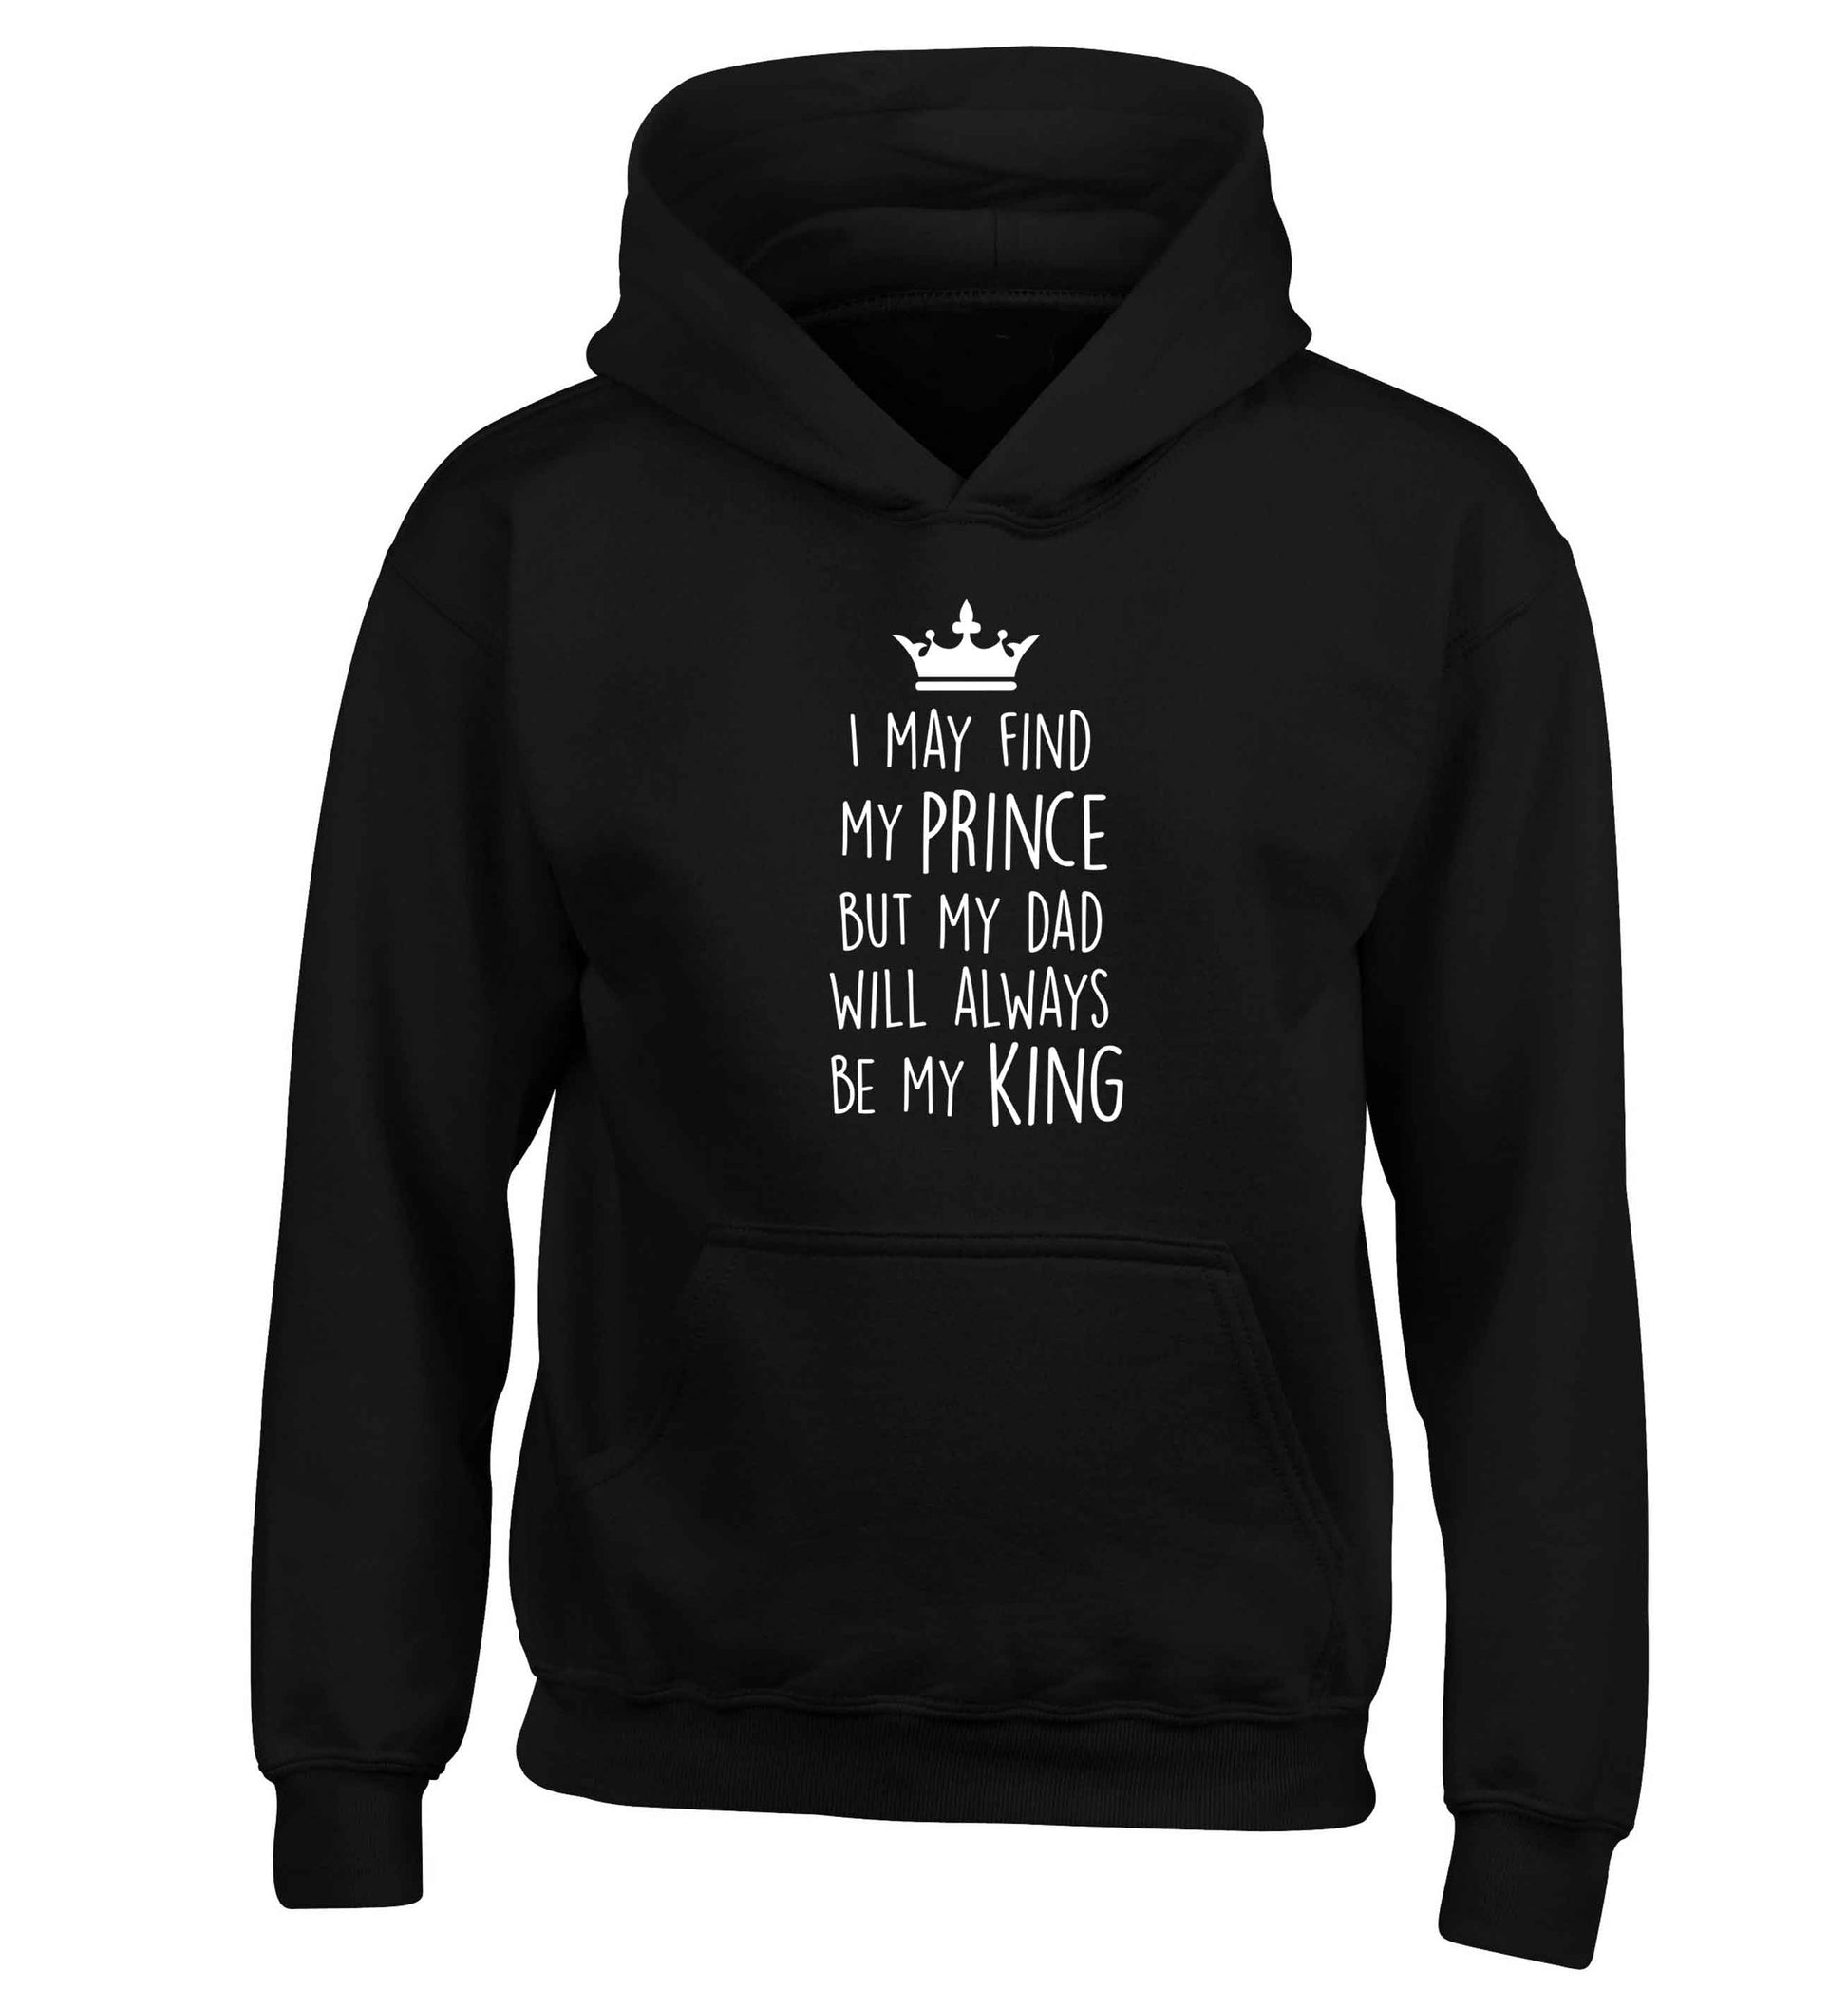 I may find my prince but my dad will always be my king children's black hoodie 12-13 Years